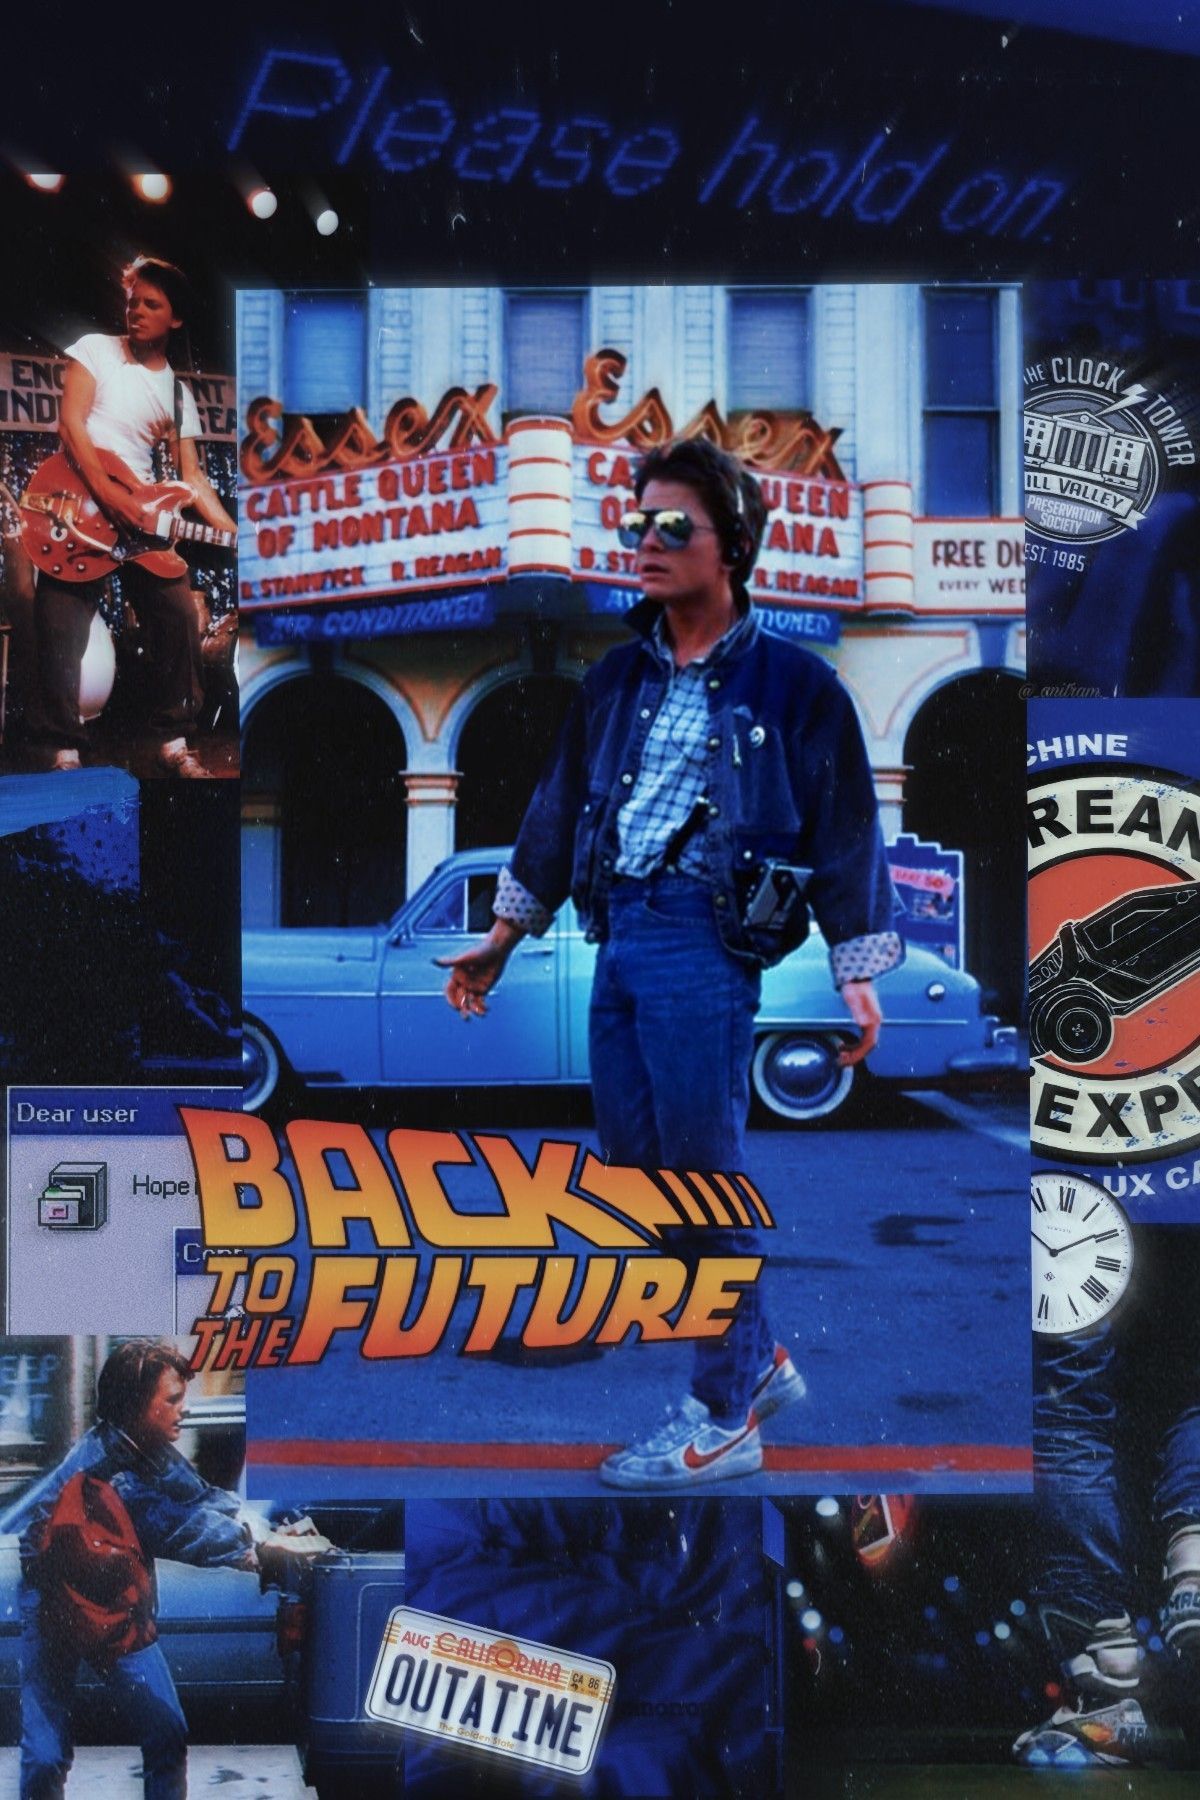 Marty McFly×s aesthetic wallpaper, Future wallpaper, 80s retro aesthetic